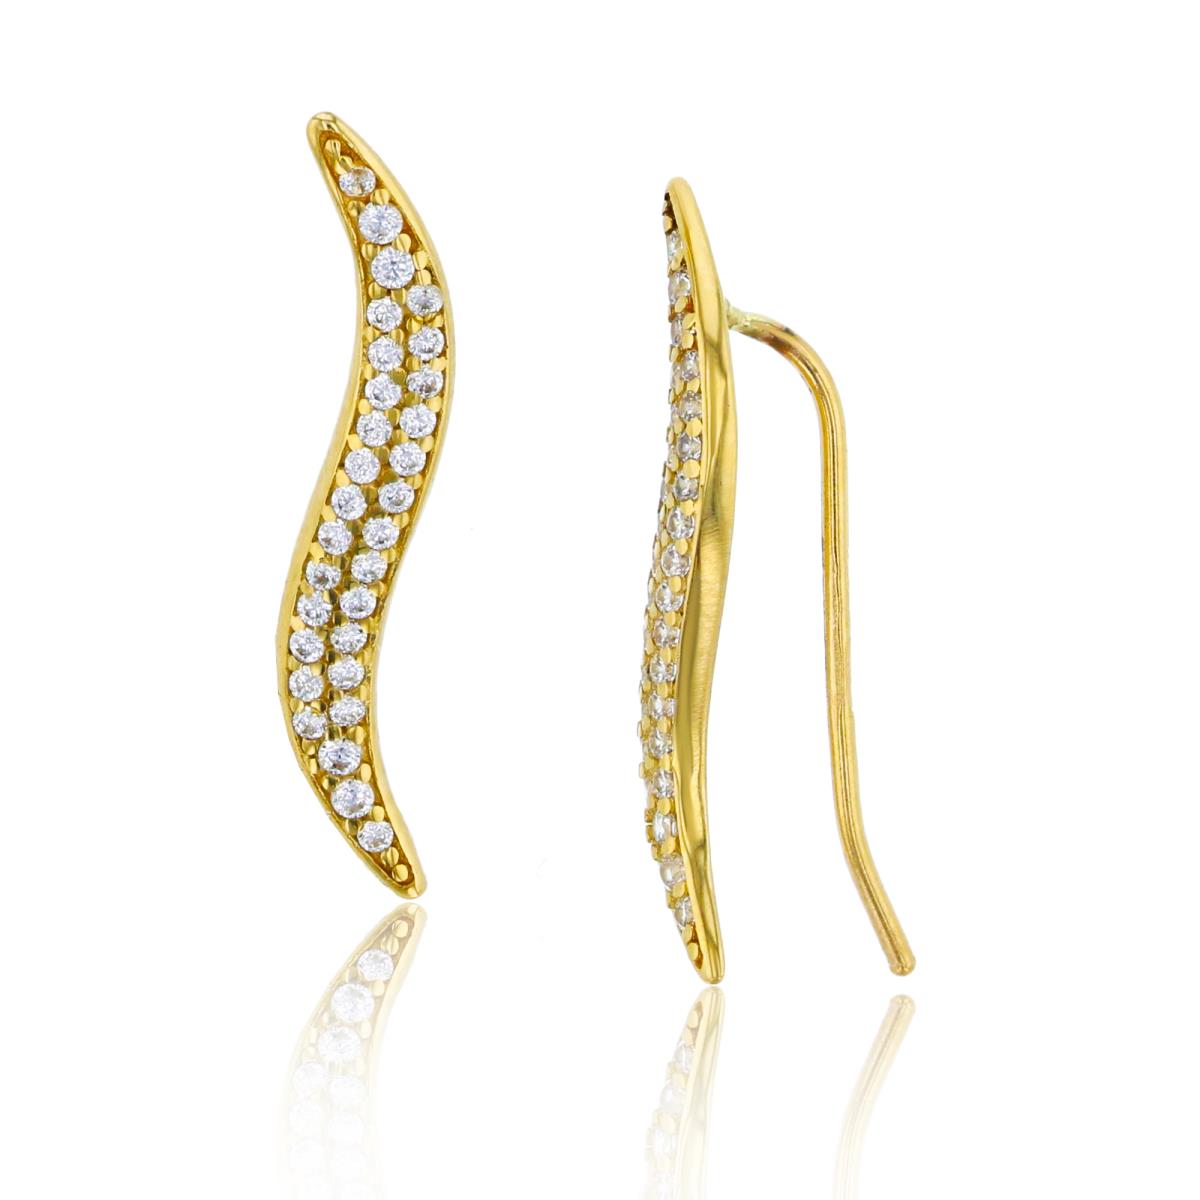 14K Yellow Gold 22x4mm Pave "S" Shaped Ear Crawler